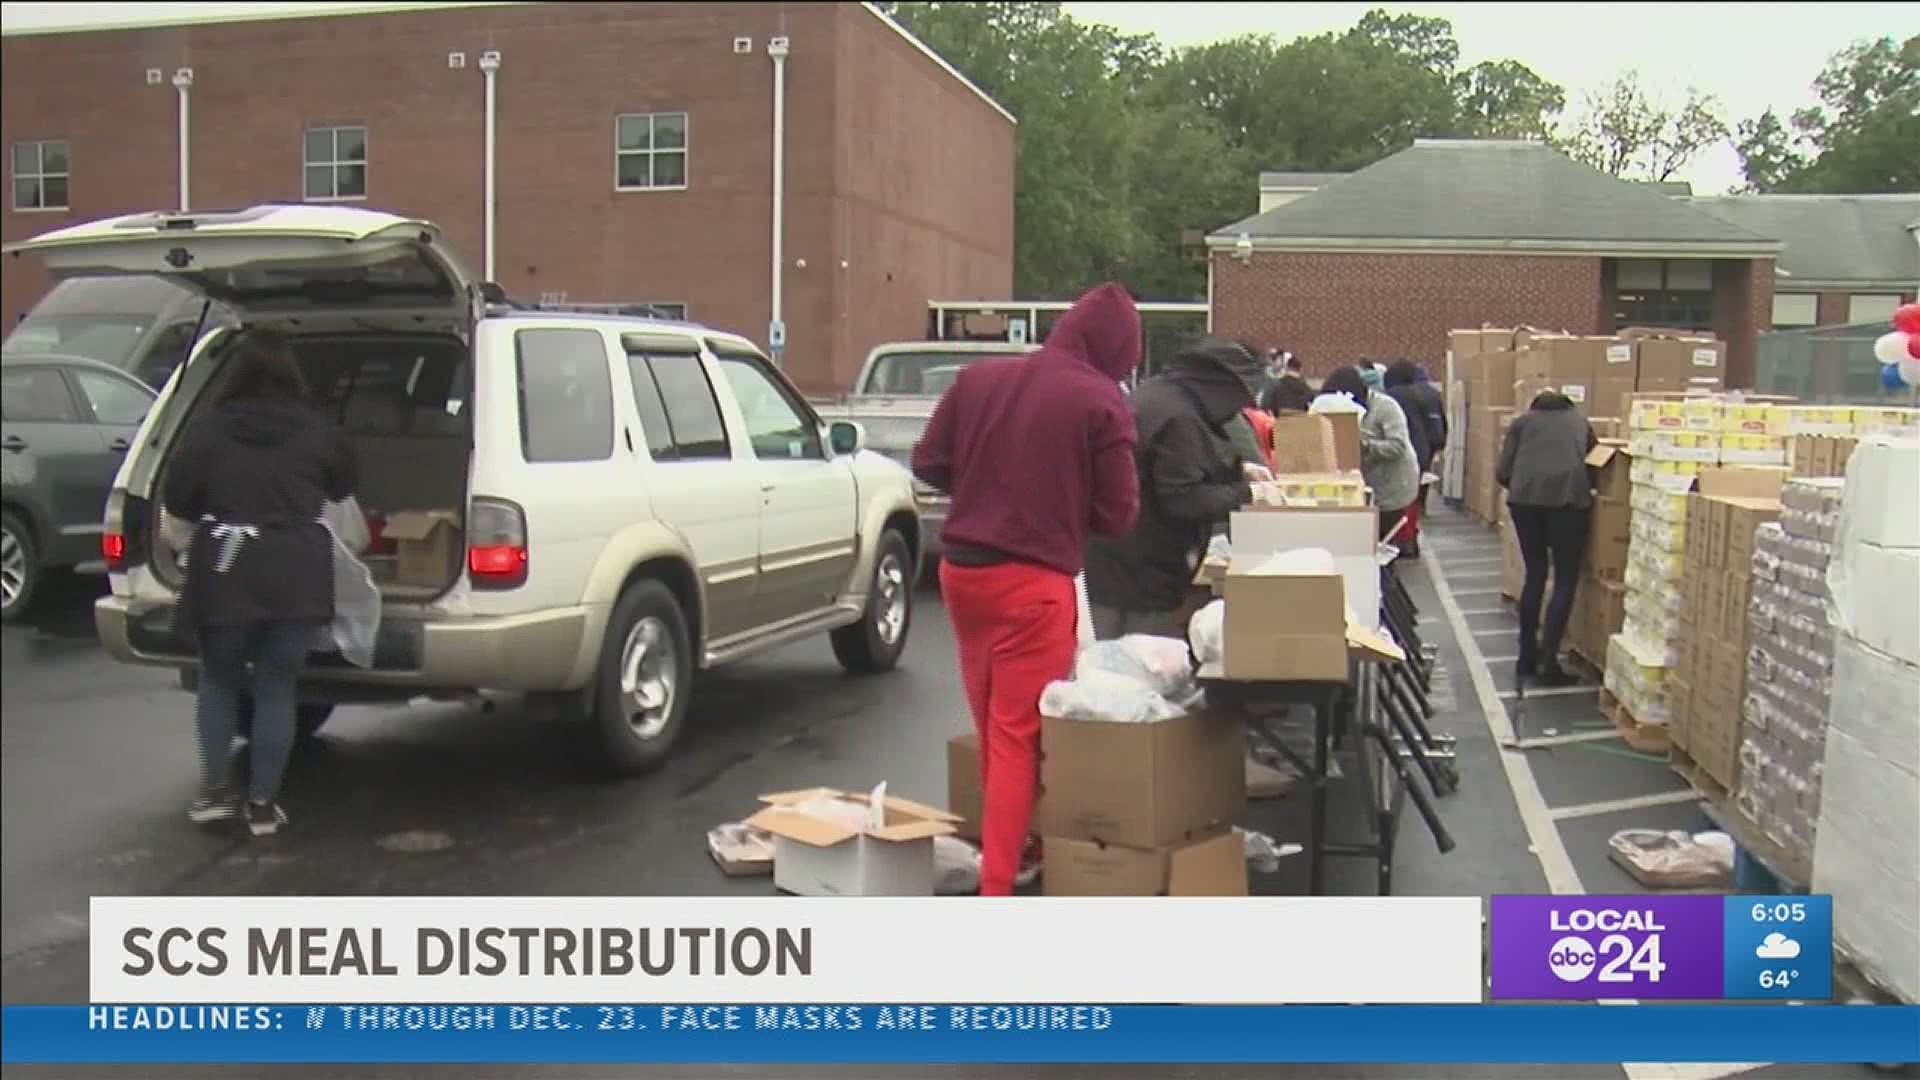 “Shelby County Schools is still open. We’re still providing bulk meal distributions every Thursday and Friday,” said Genard Phillips, SCS Chief of Business Operation